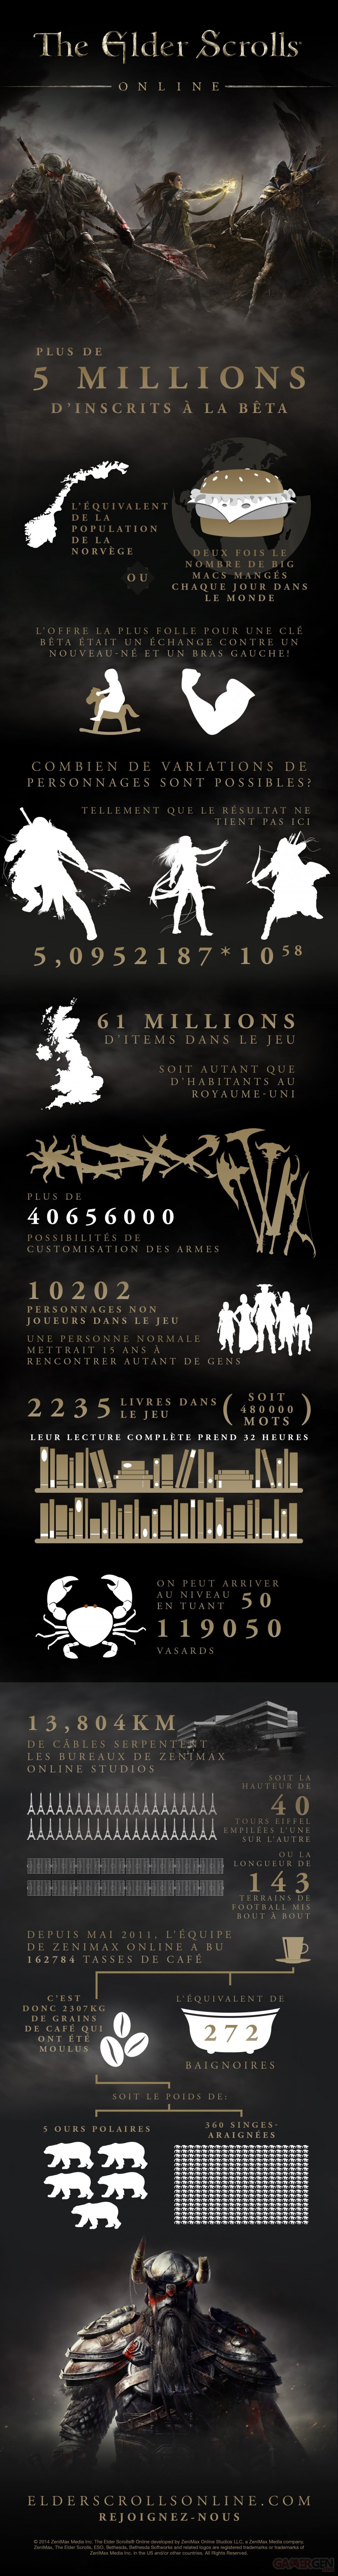 The Elder Scrolls Online infographic_French